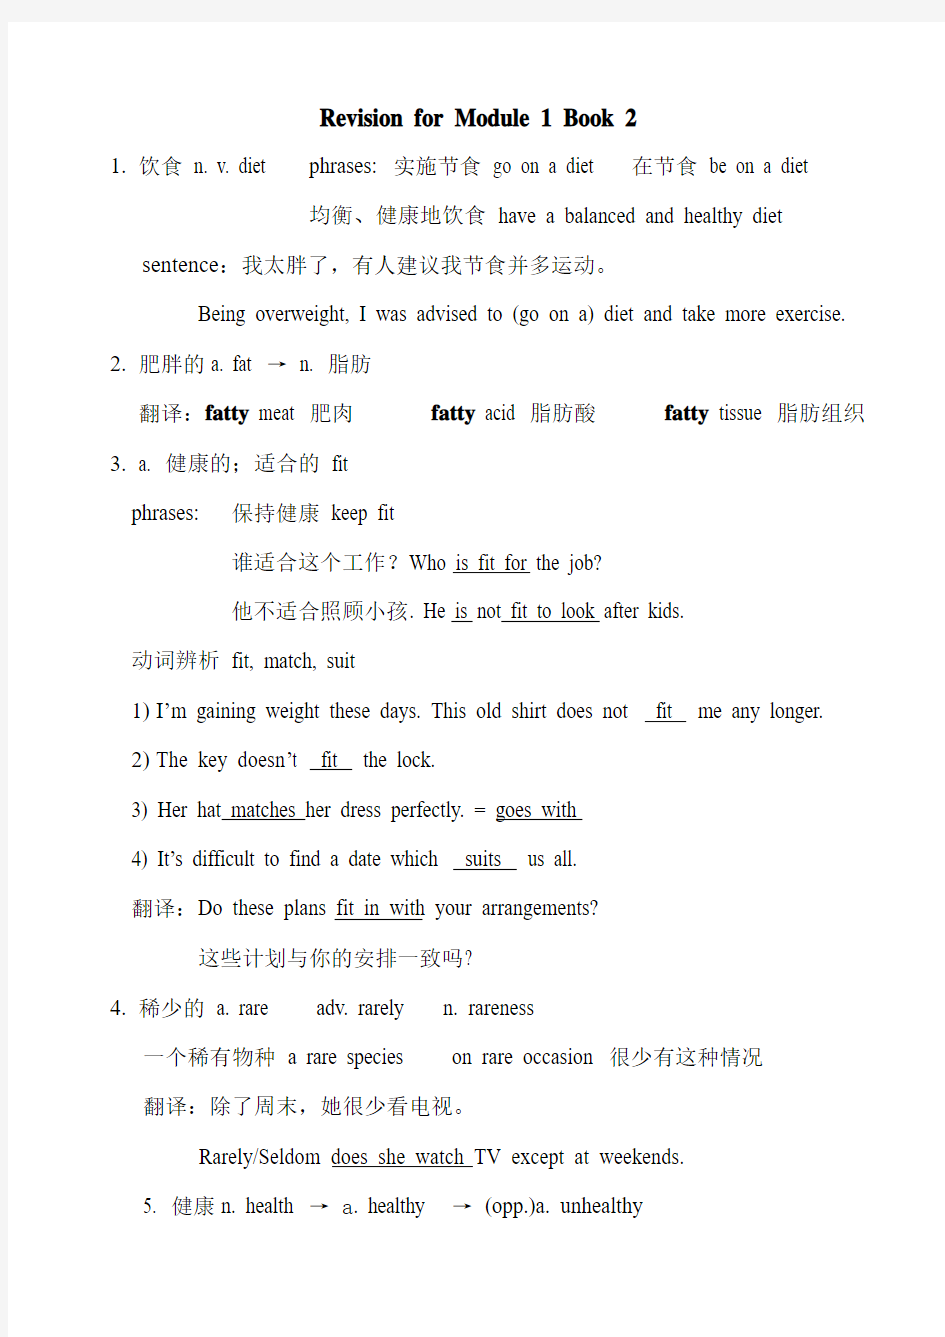 Revision for Module 1 Book 2 答案